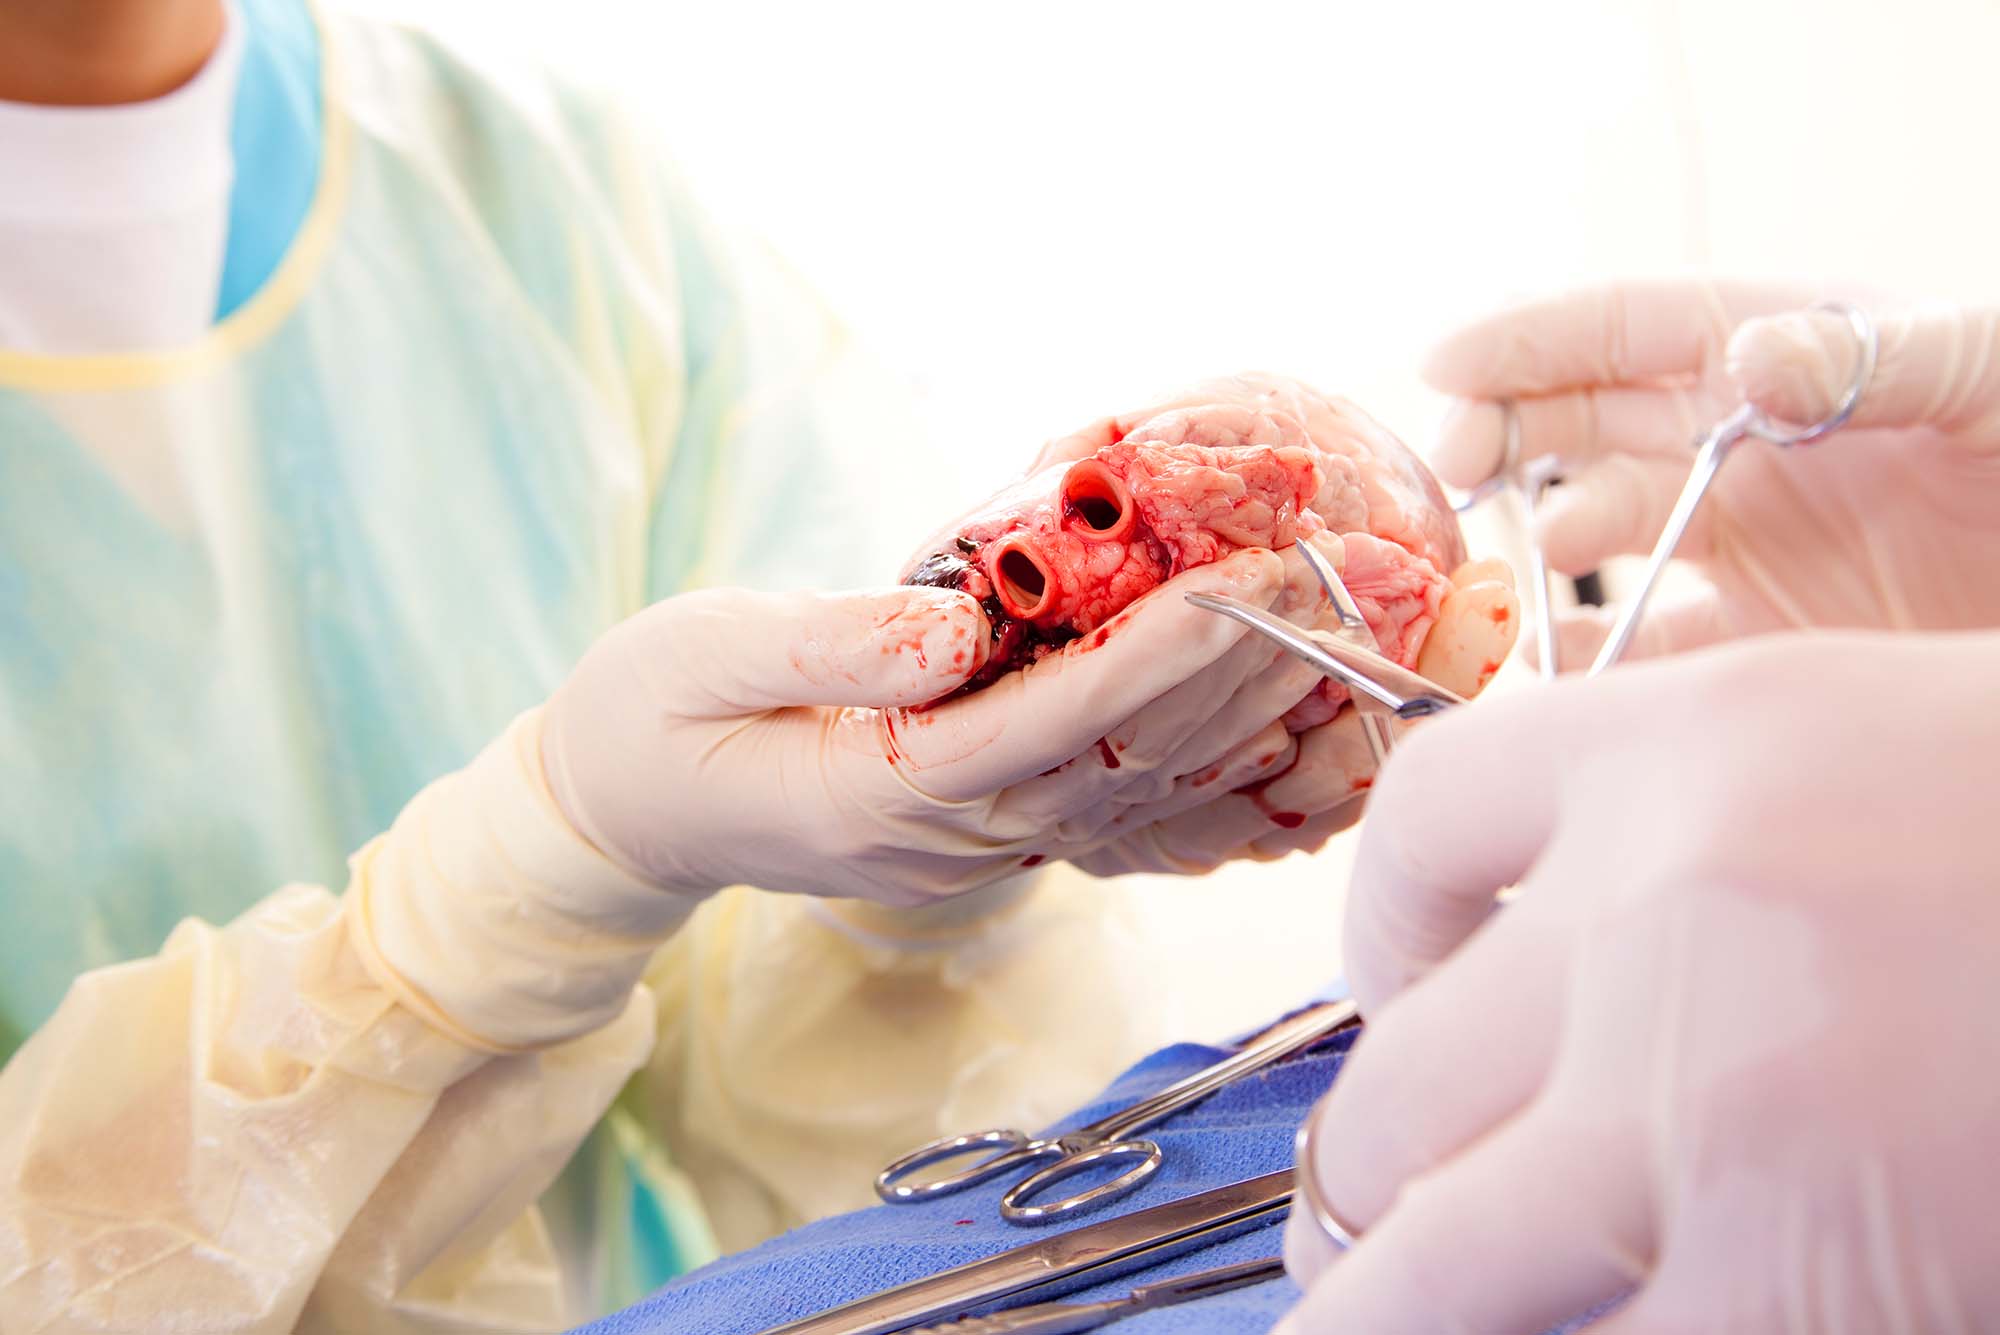 A surgical assistant holds a human heart in their hands during open heart surgery.